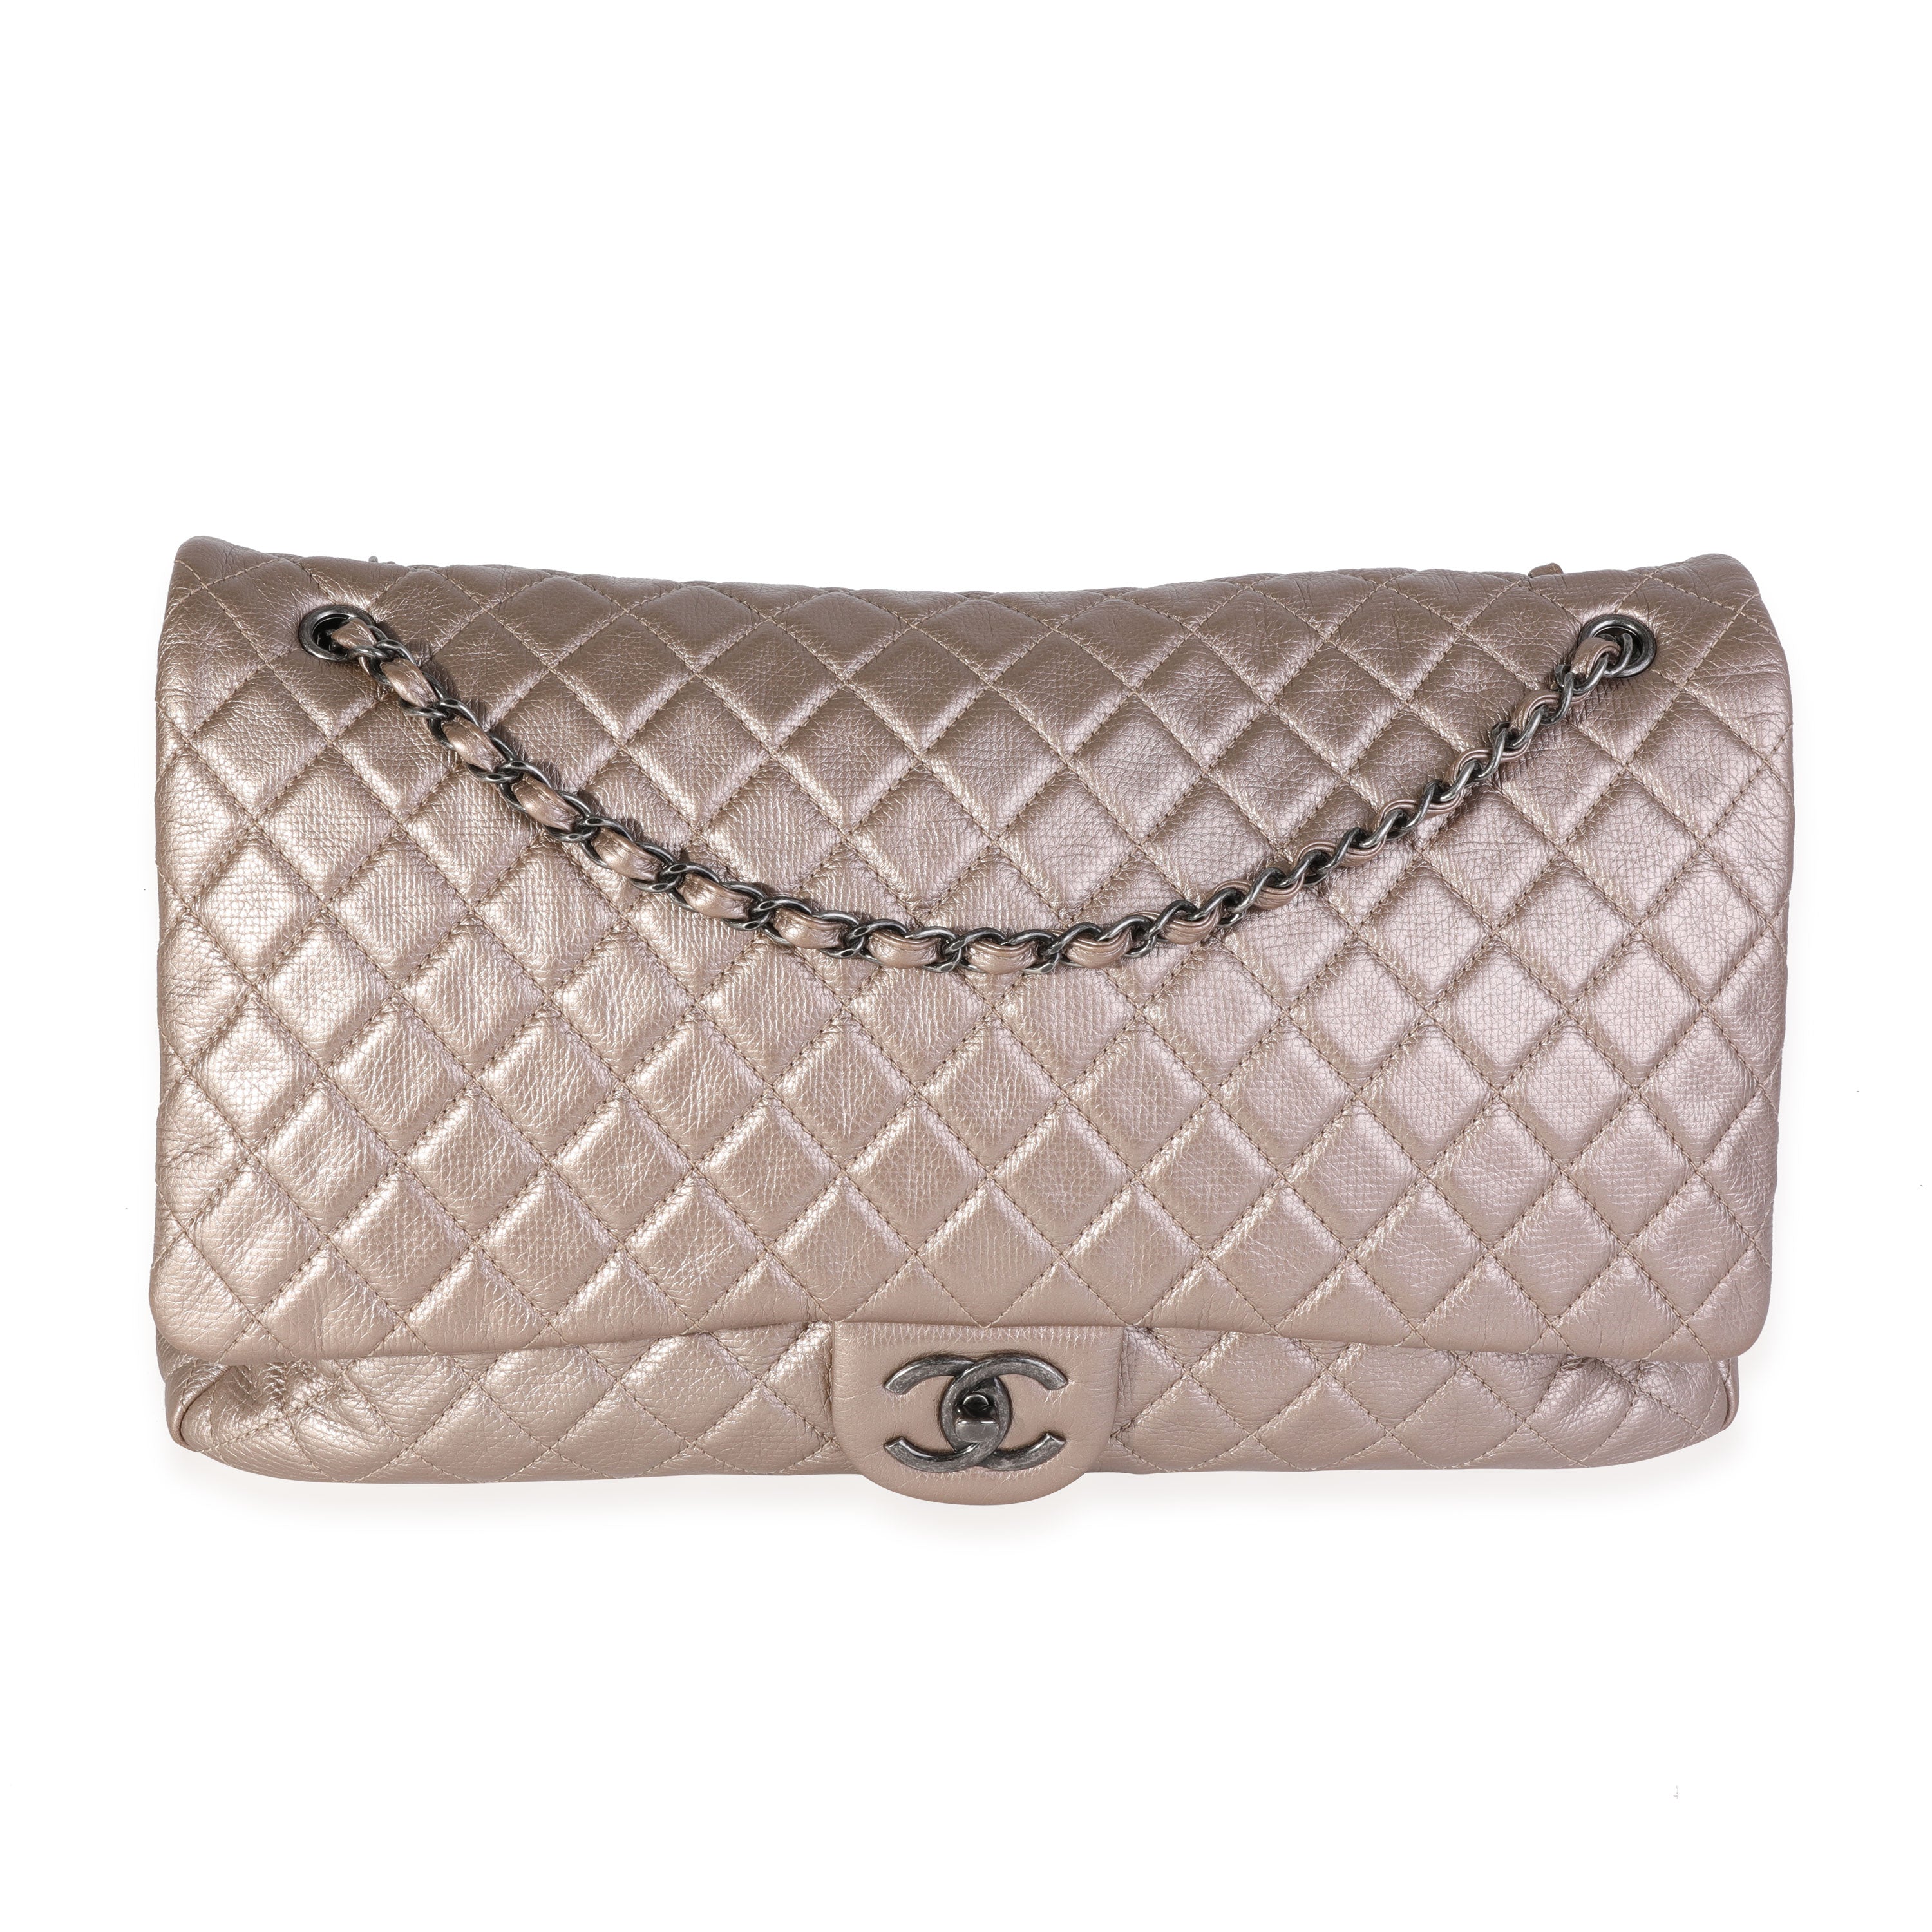 Chanel Metallic Grey Quilted Calfskin Small XXL Airline Travel